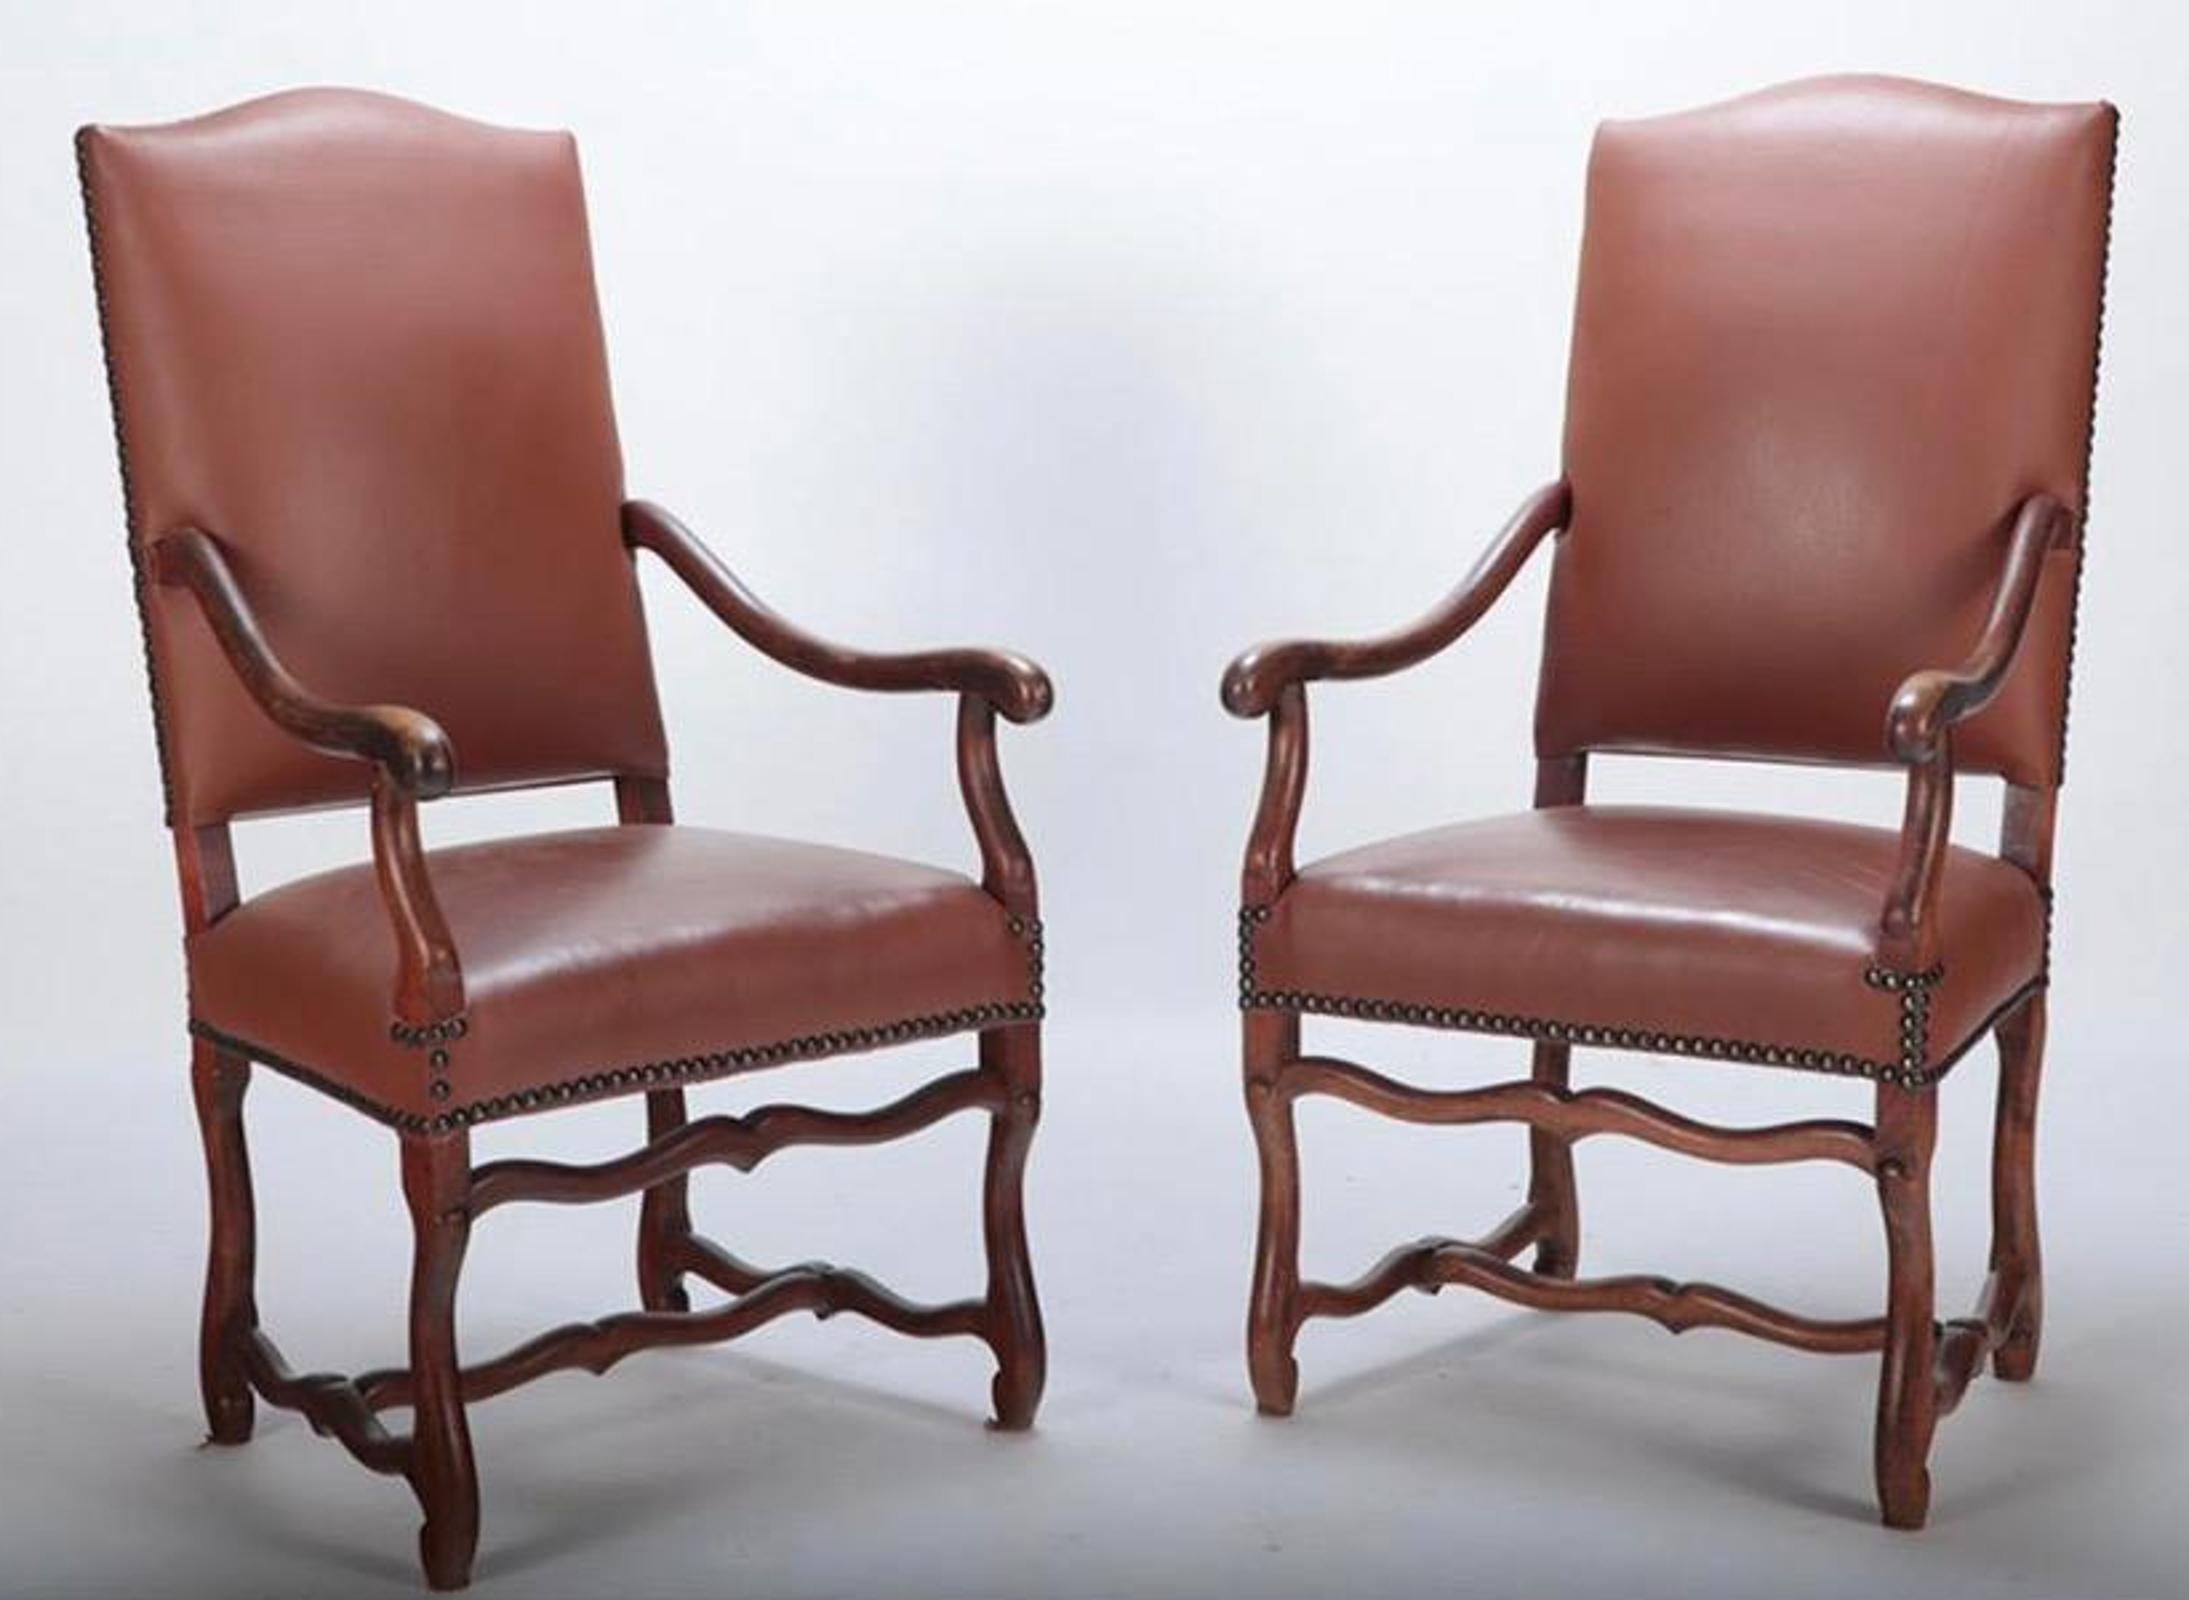 Set of eight early 20th century french high back beech wood & leather dining chairs. Circa 1920s.
Measures: Armchairs: 46.75